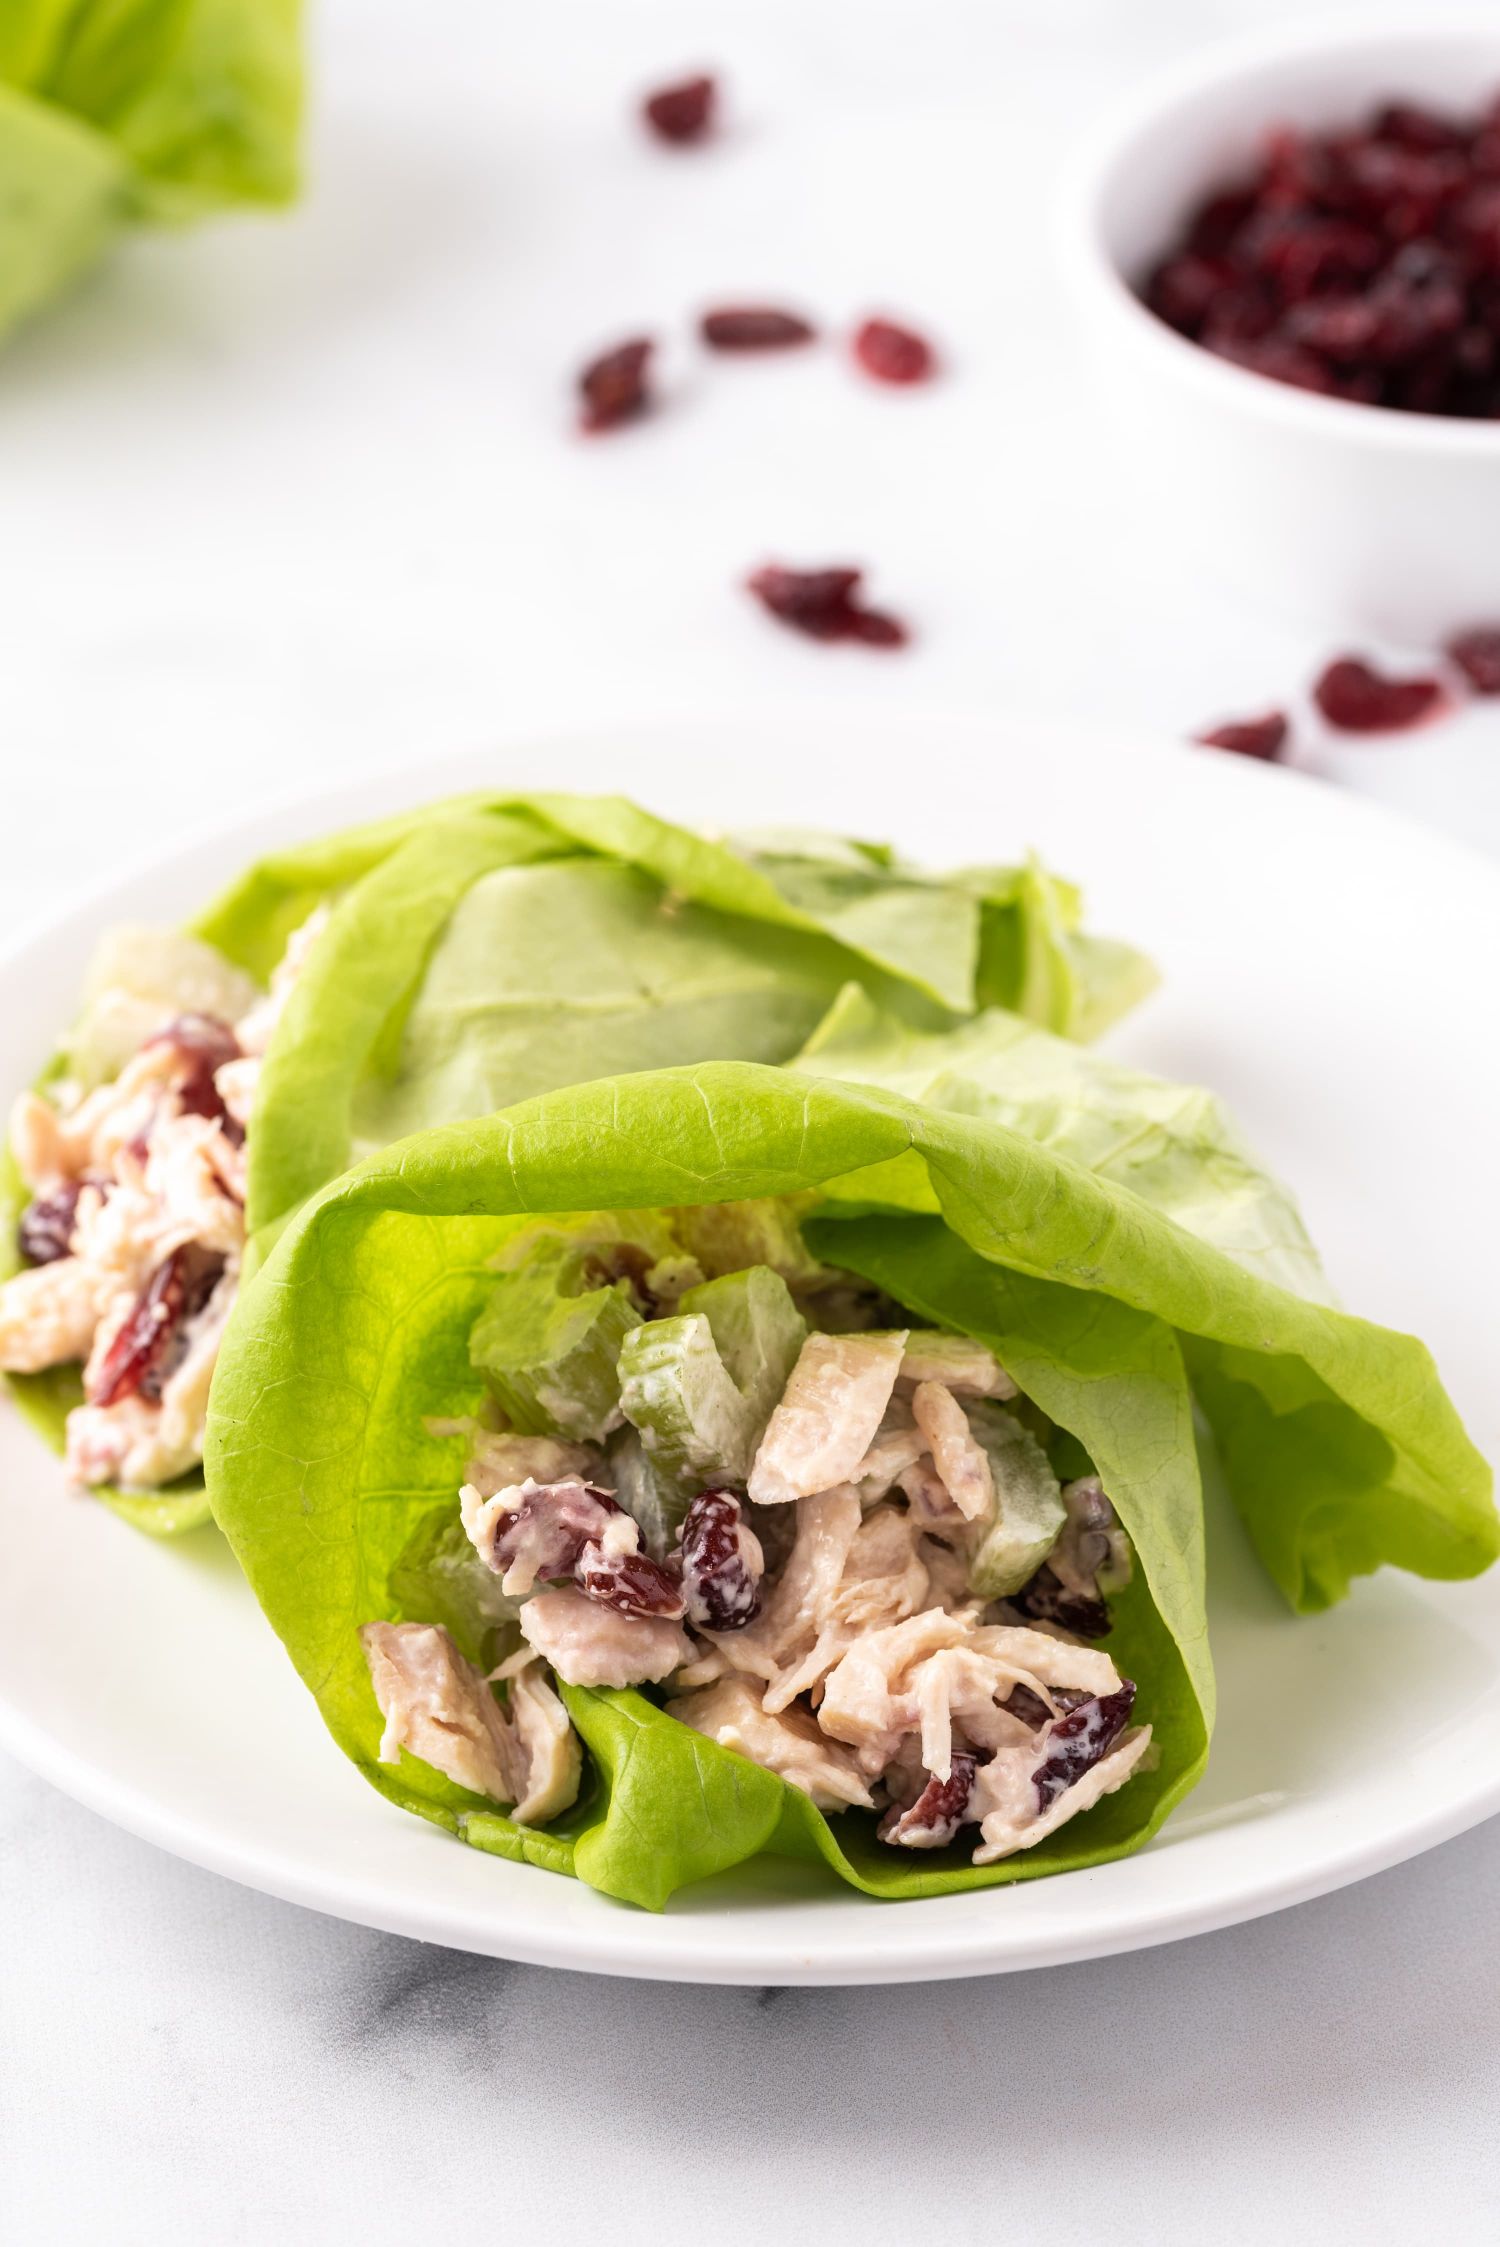 Cranberry chicken salad wrapped in butter lettuce with celery on a white plate.